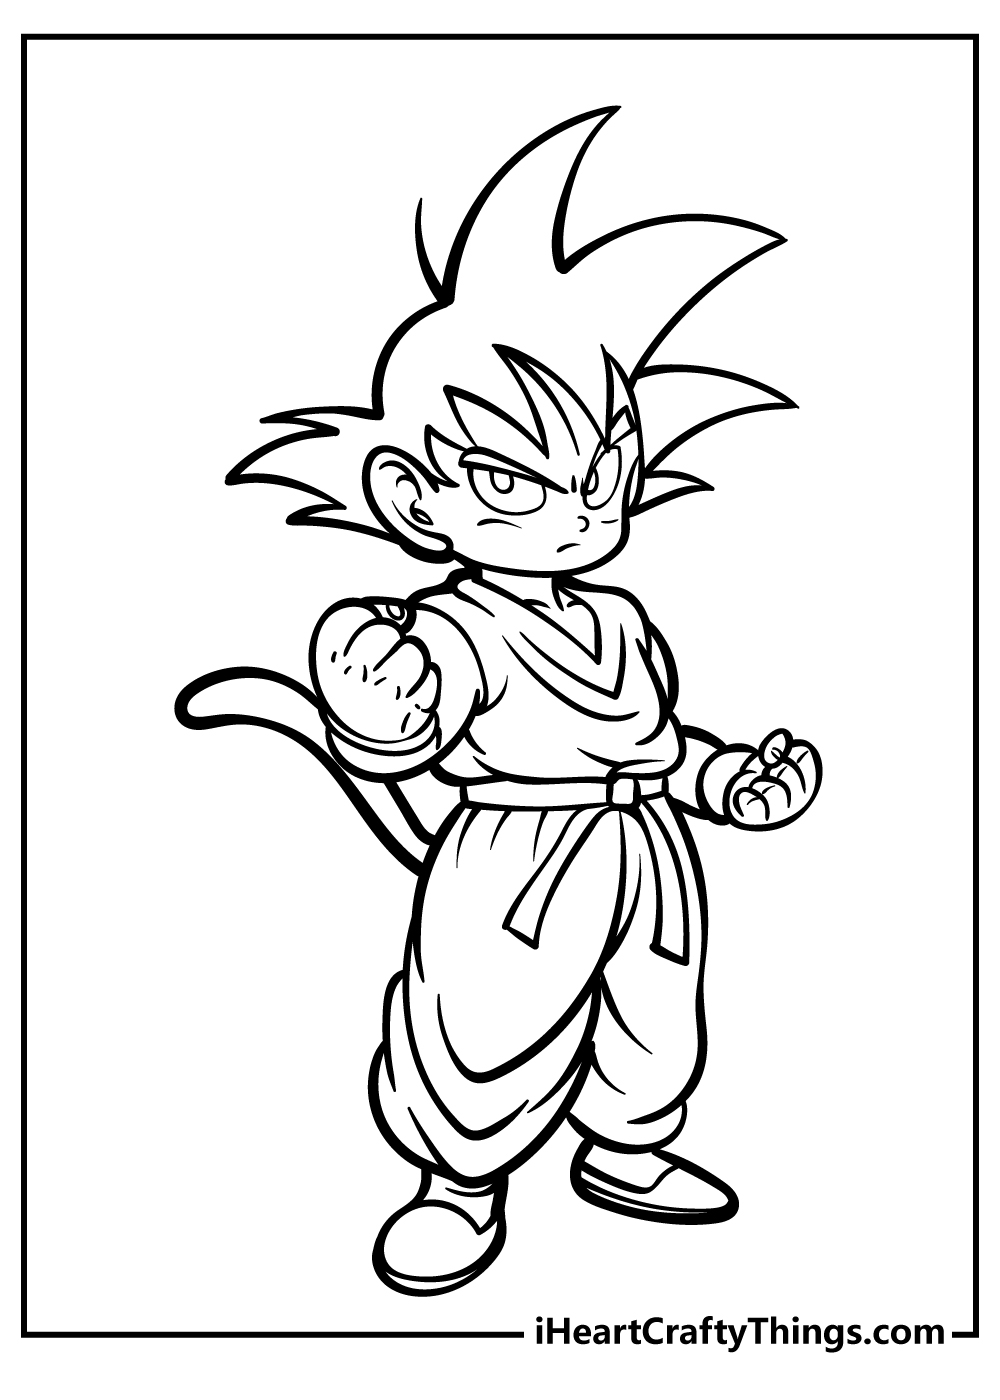 Printable Dragon Ball Z Coloring Pages Updated 20